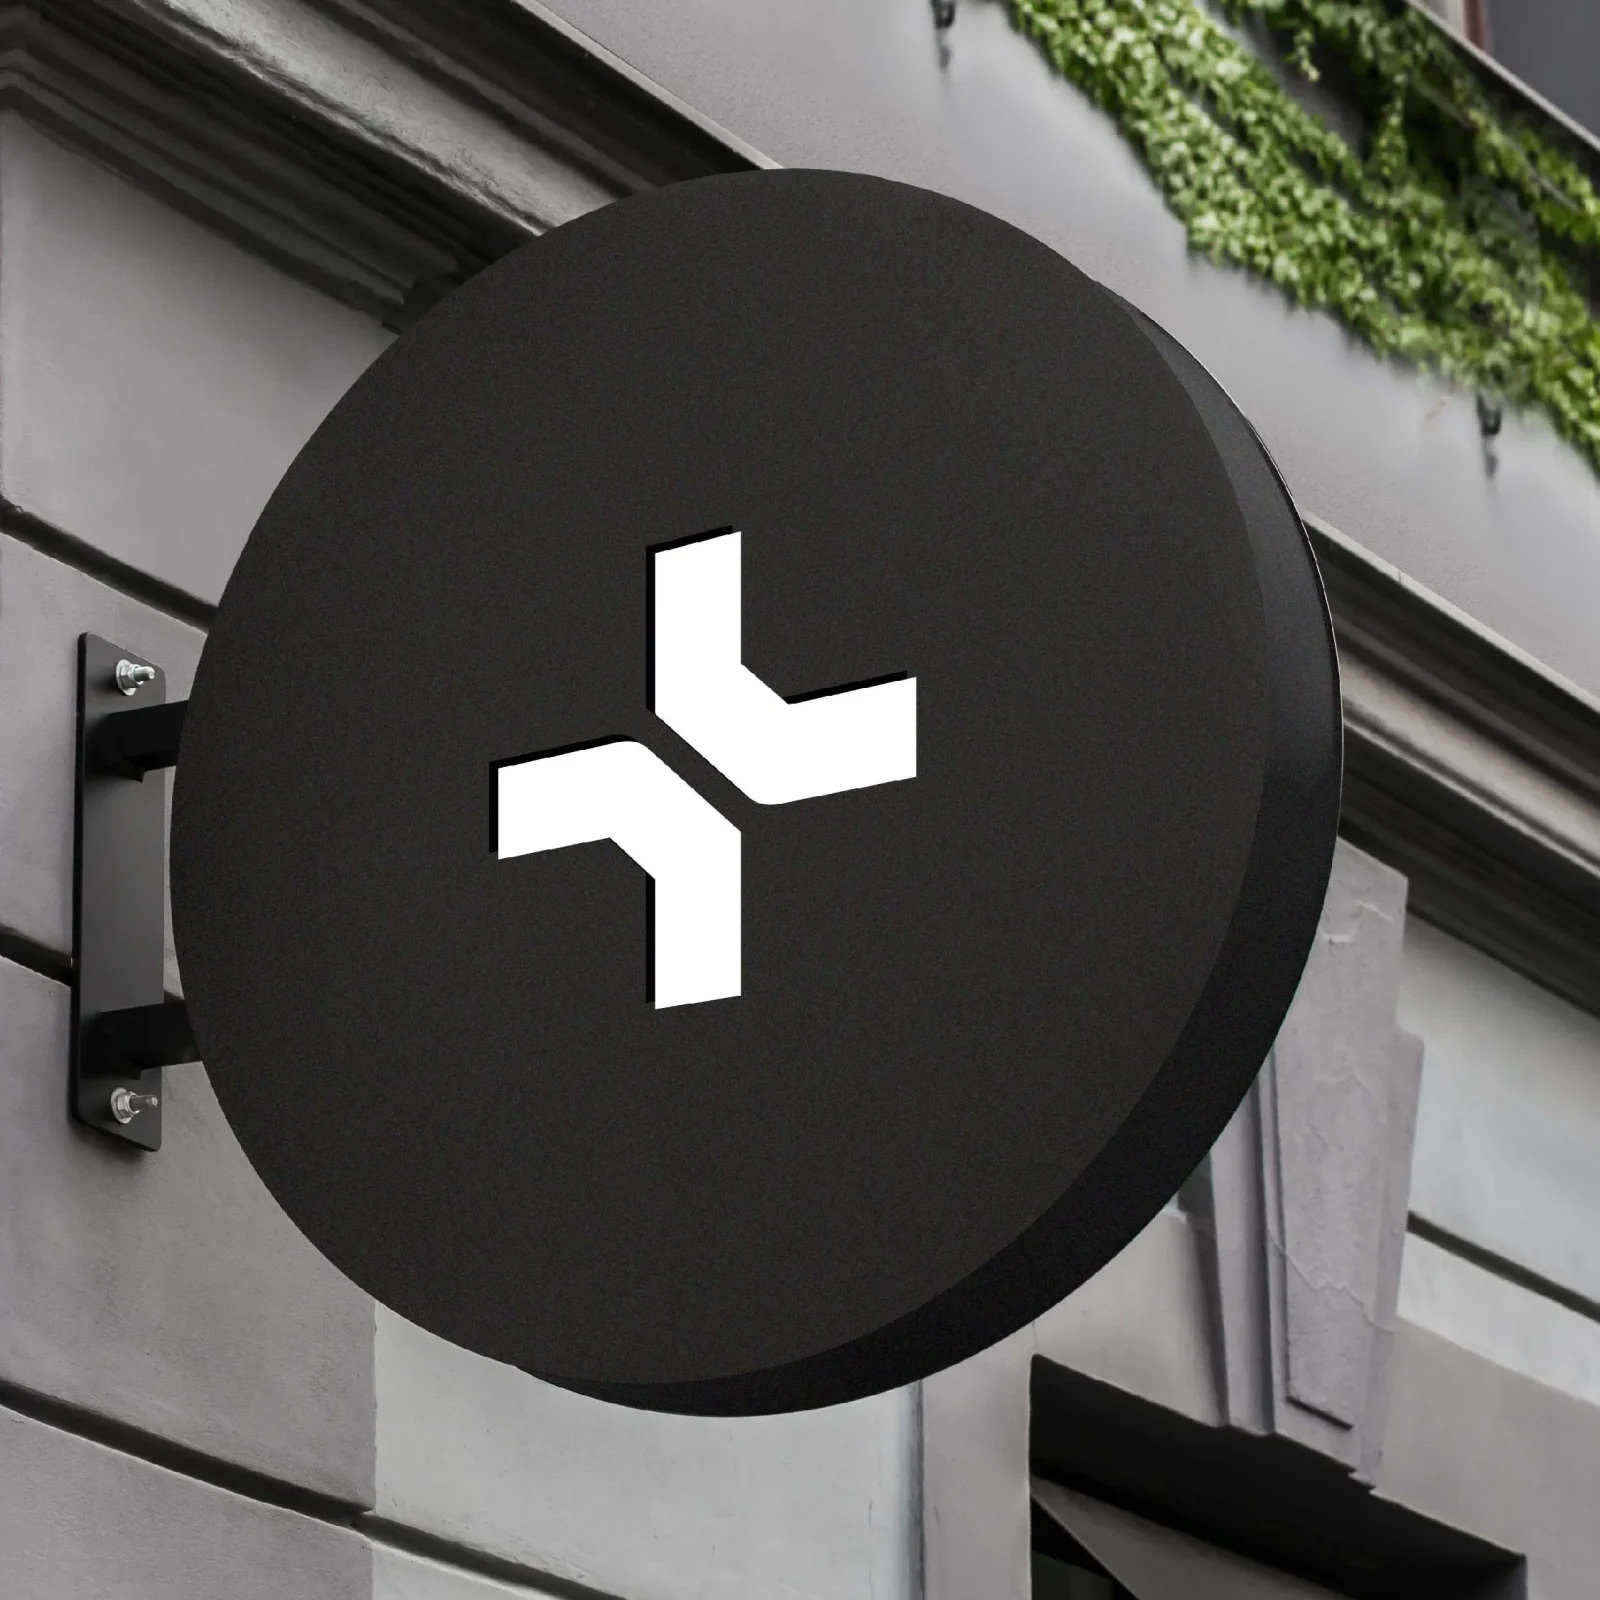 A circular black sign with a white arrow pointing left and branching to the upper right, designed by a design agency in Wales, mounted on a gray building facade next to green foliage.